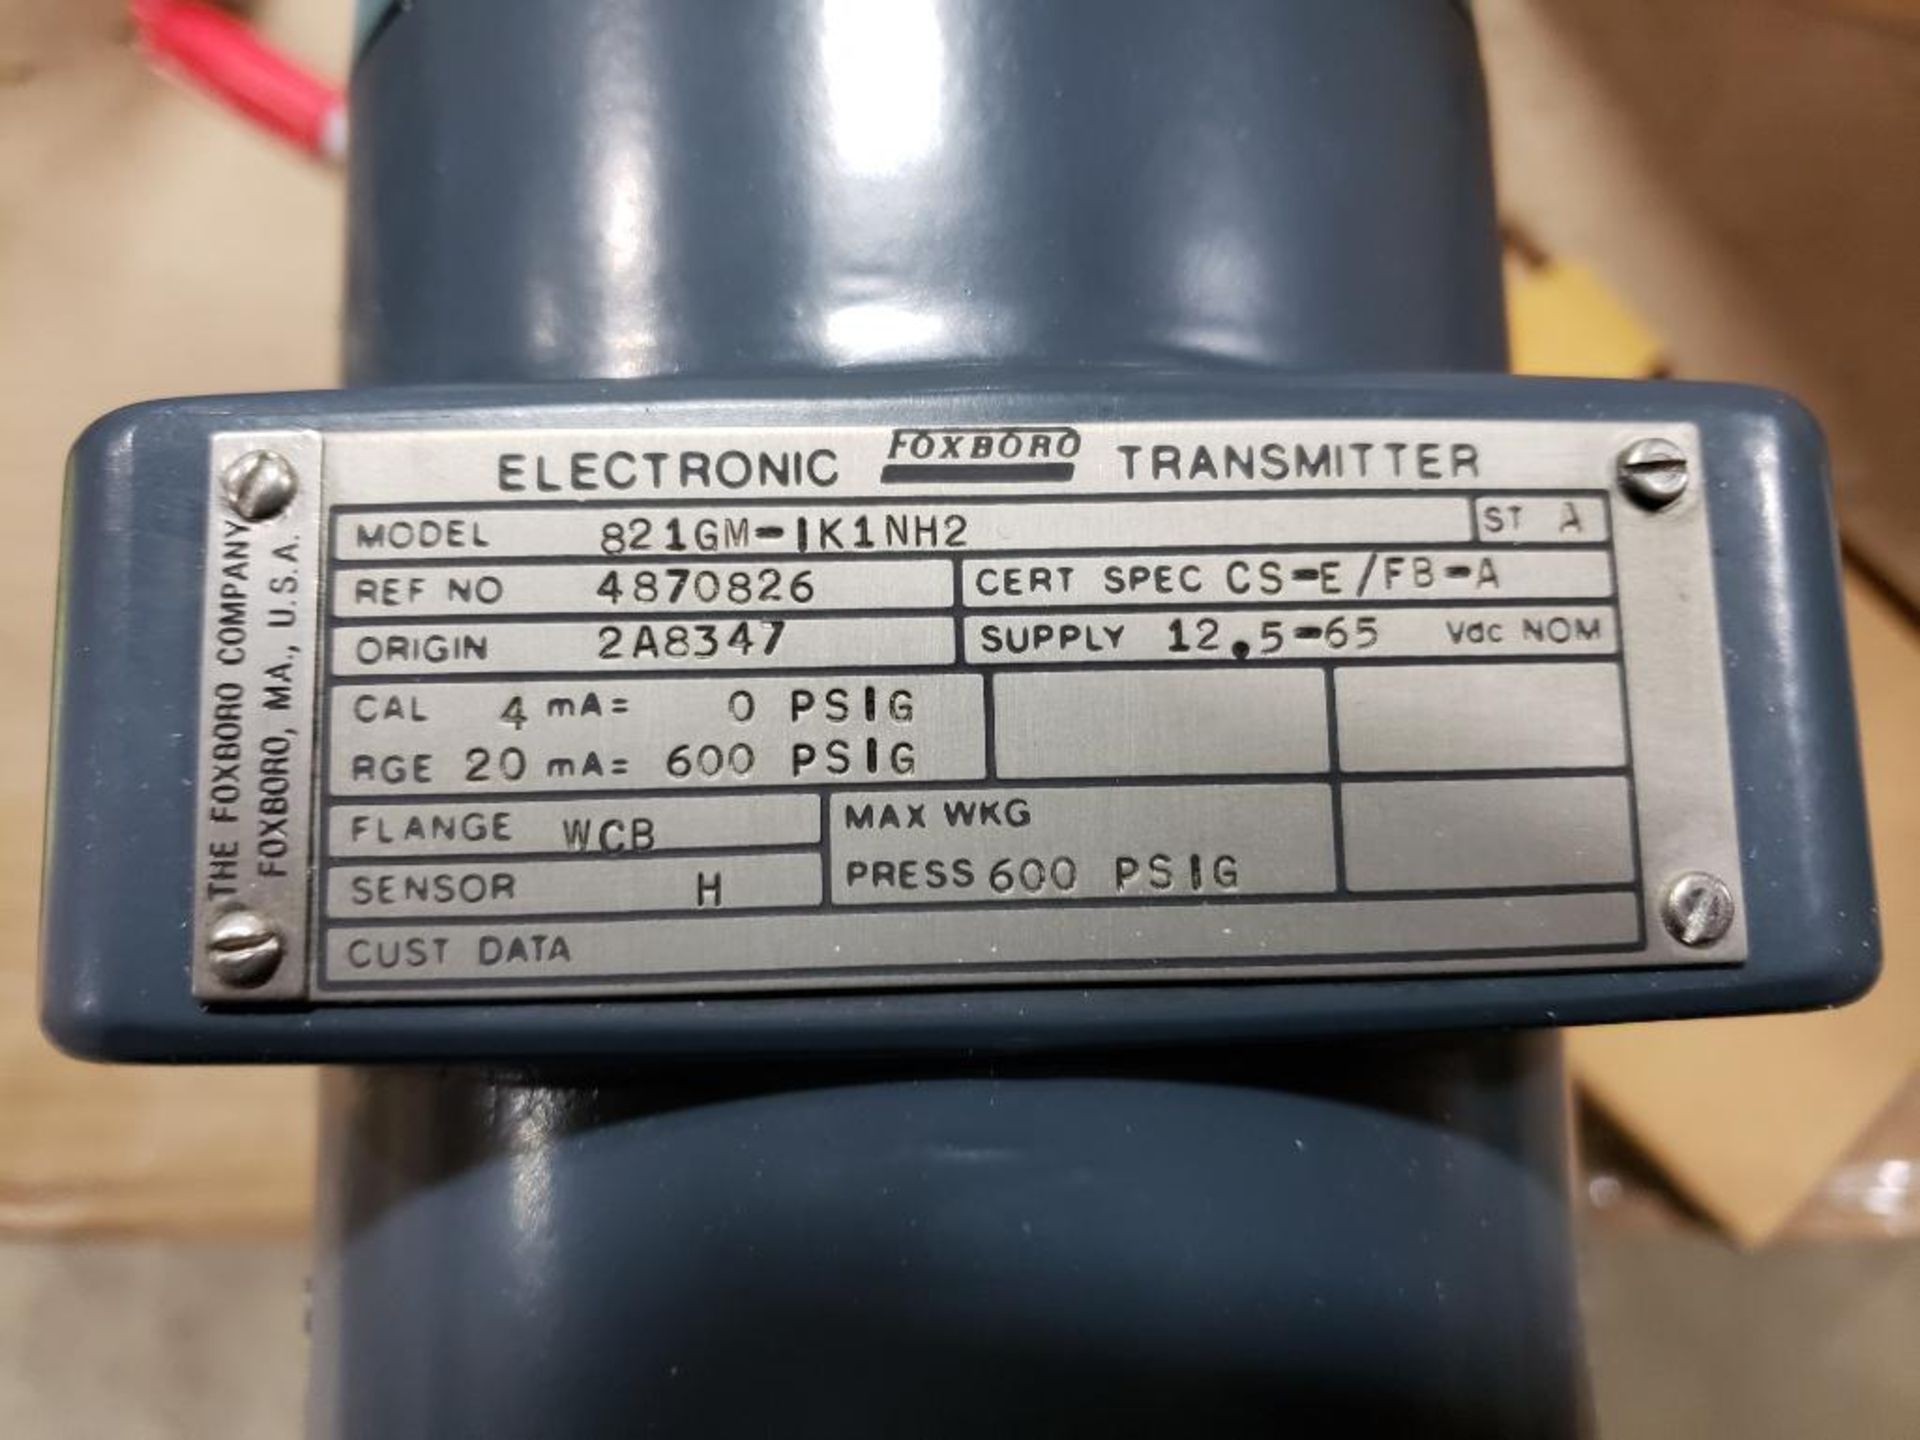 Foxboro 821GM-IK1NH2 Electronic Transmitter. Pressure switch. New in box. - Image 3 of 4